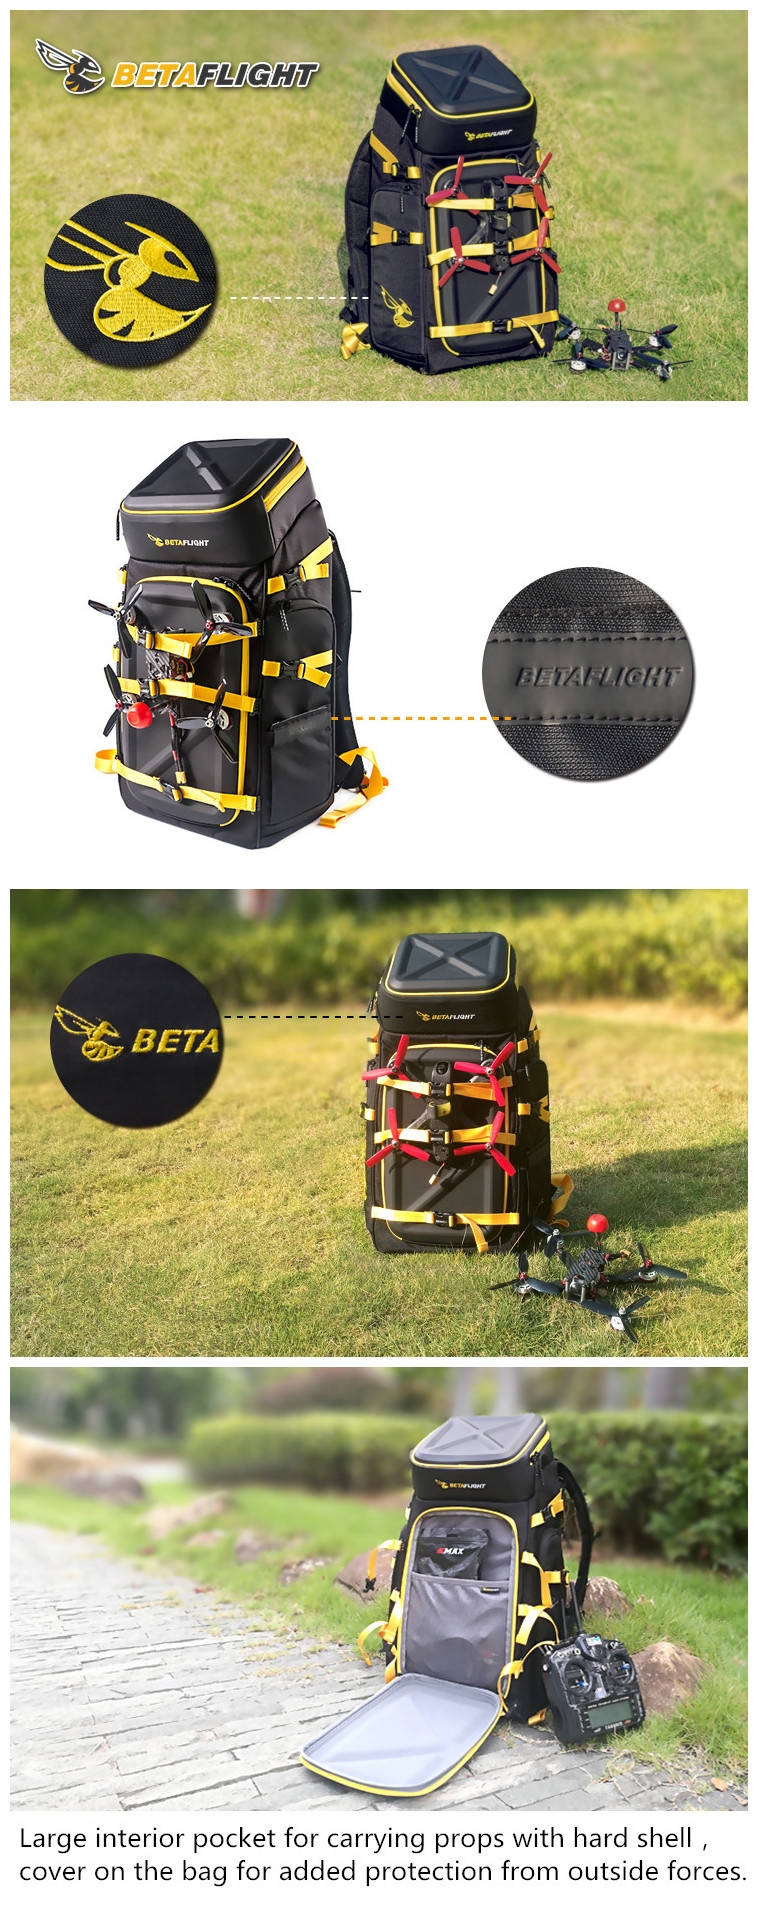 BETAFLIGHT HIVE Backpack 560x340x180mm Fireproof Lipo Bag w/ Waterproof Cover for RC Drone FPV Racing